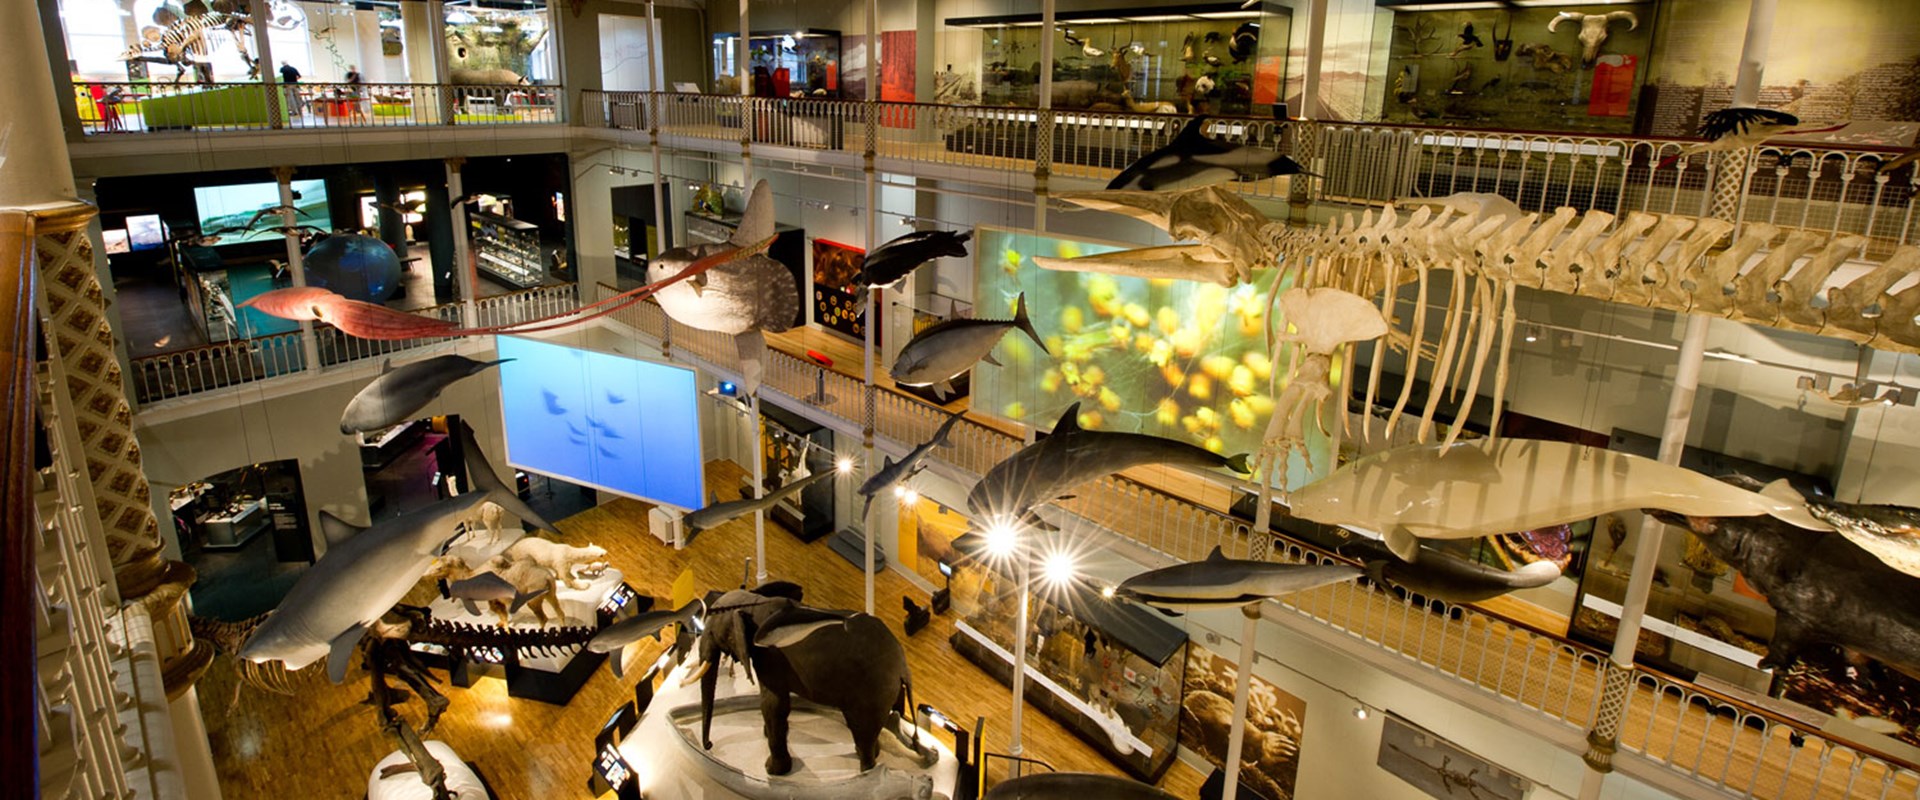 A large, 3-story gallery space with an atrium where life-size models of animals are on display including marine life which hangs from the ceiling.